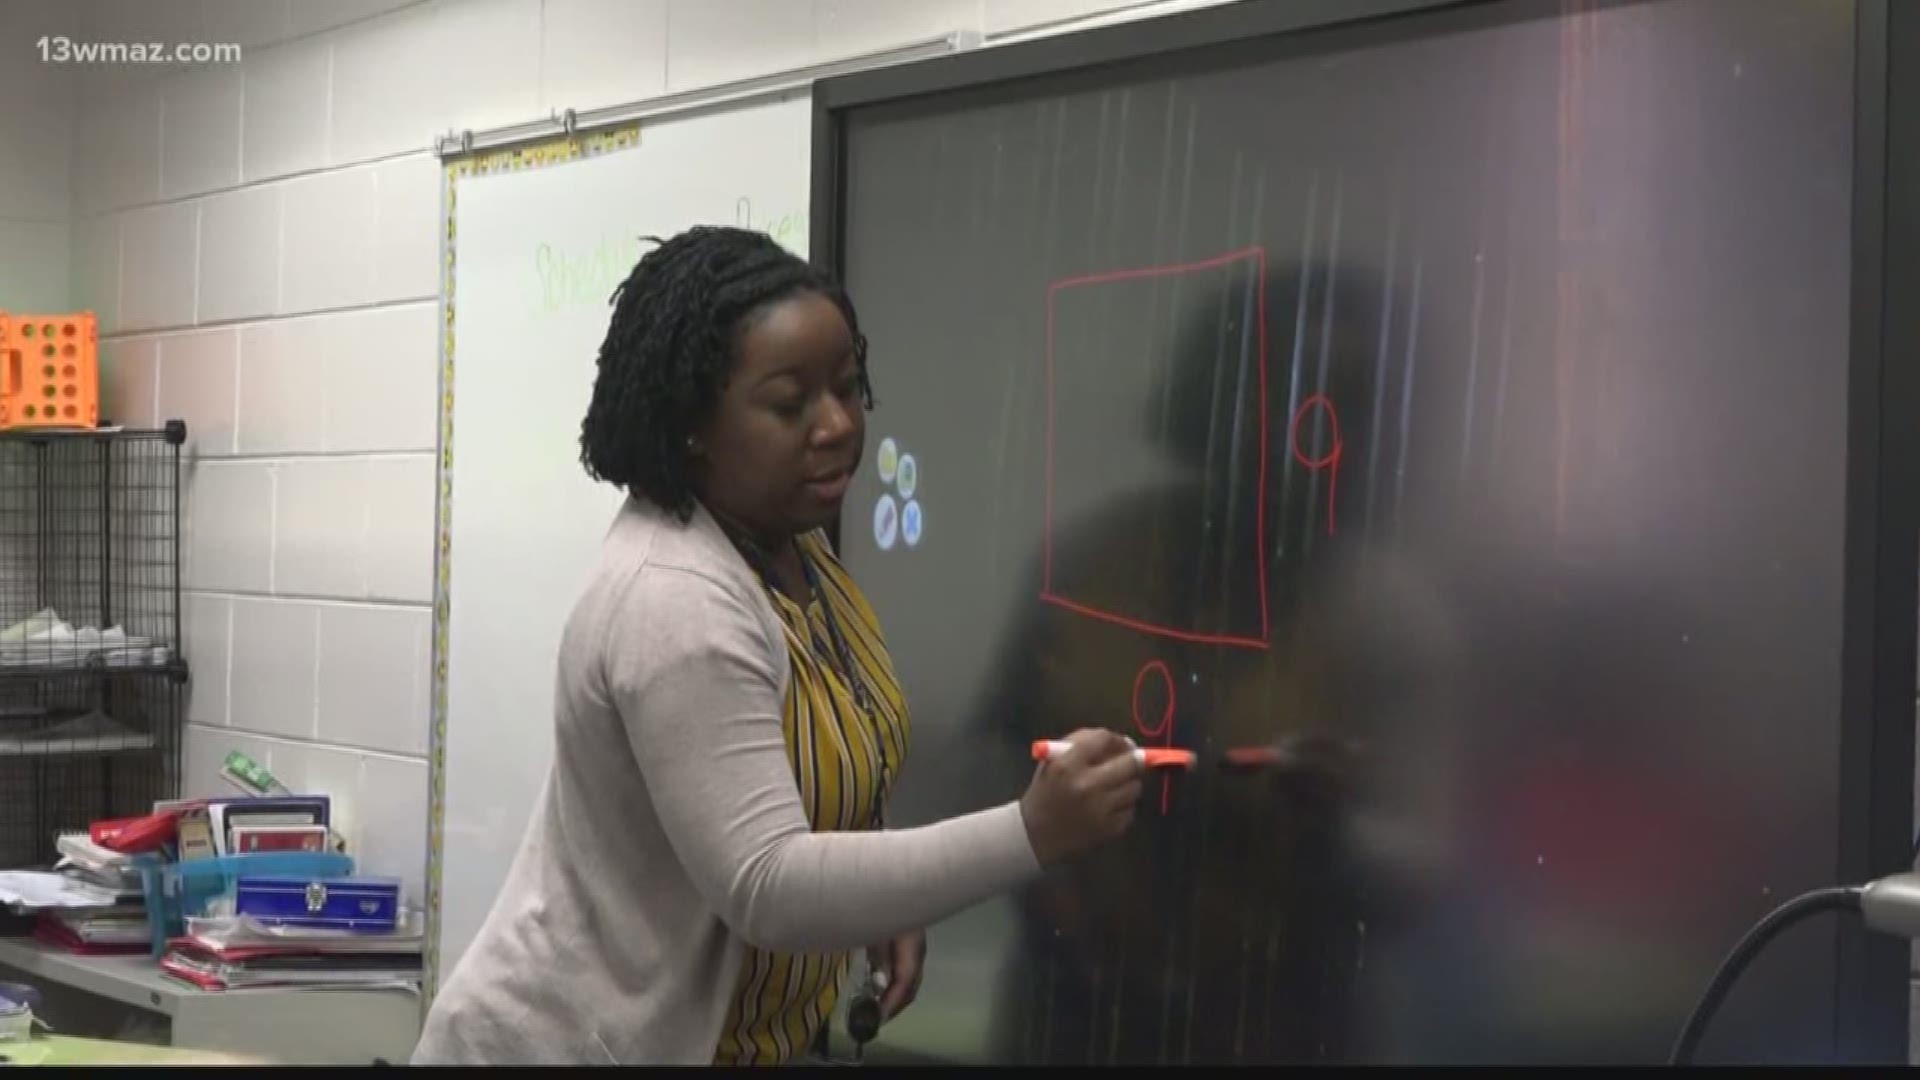 This week, we went to Porter Elementary School in Macon to meet Miss Keondra Hill, a fourth grade math teacher at the school. It's her first year teaching, but she's already made quite the impression on her students.